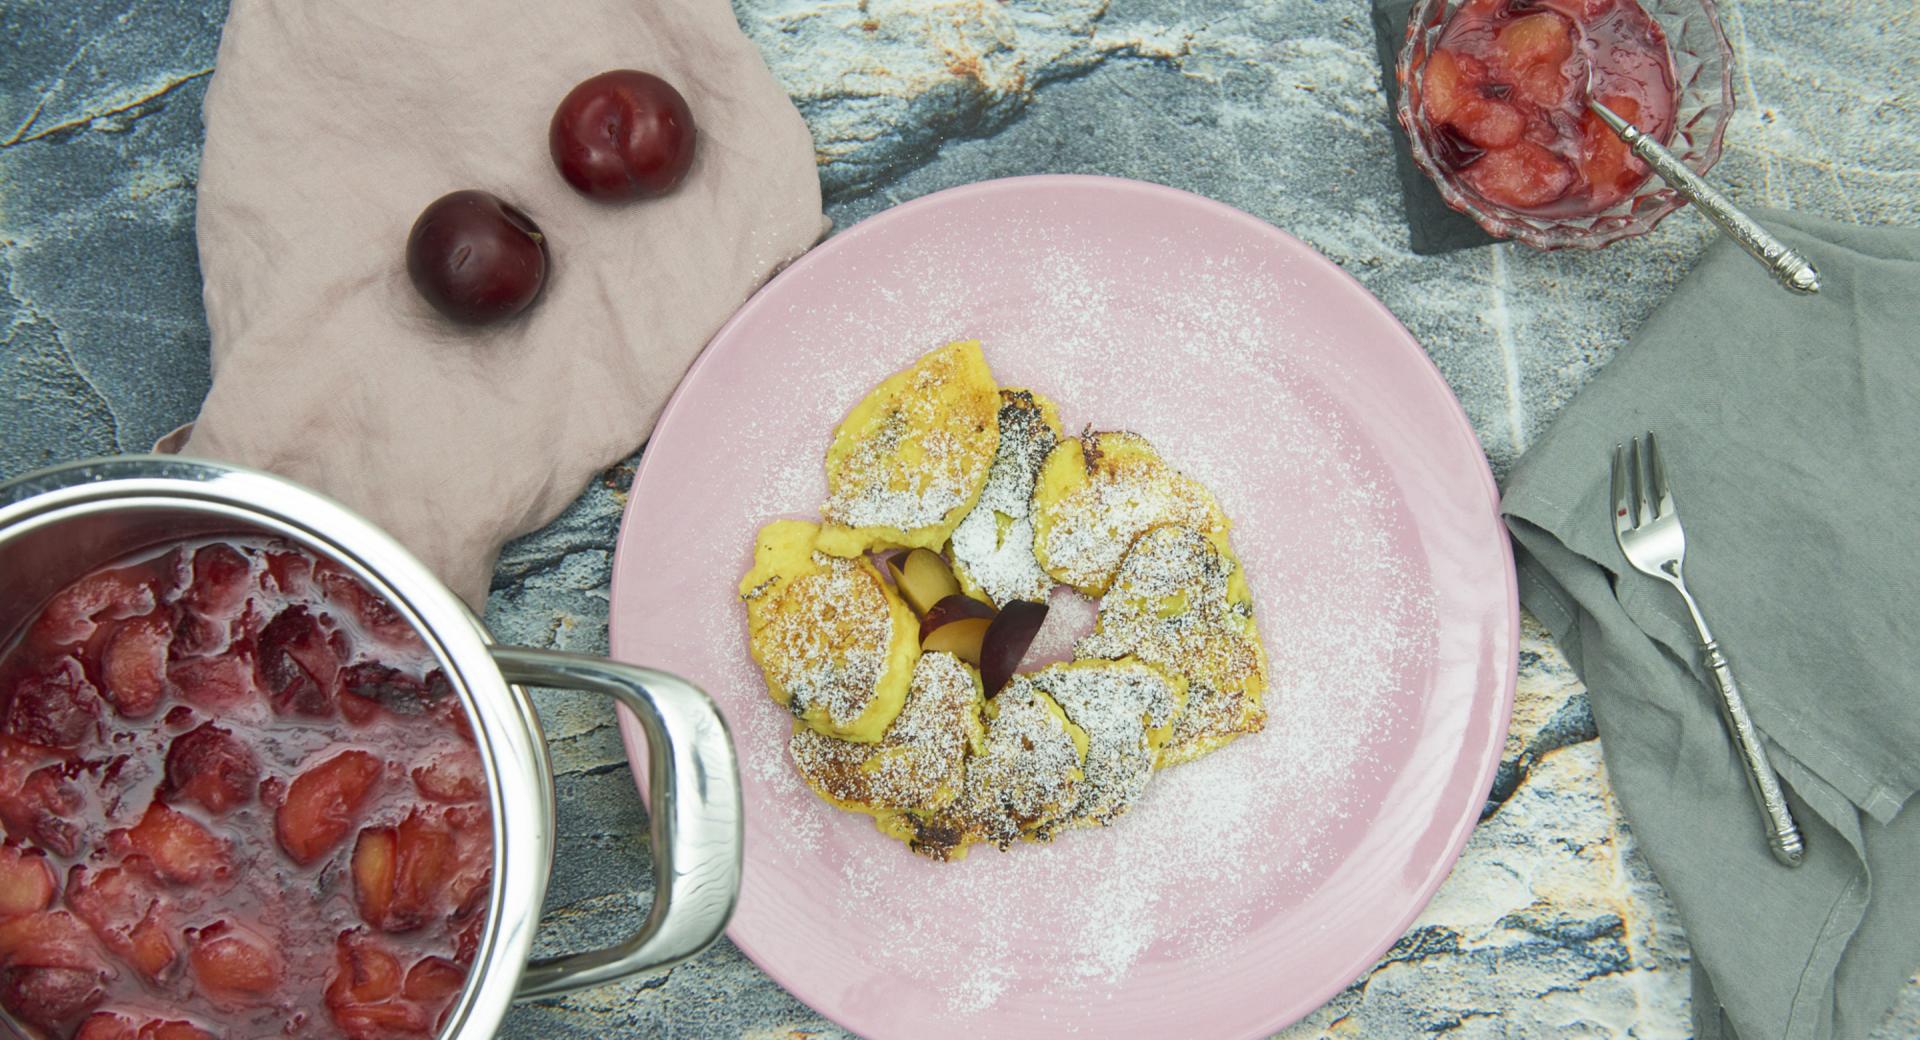 Saxon-style curd dumplings with plum compote